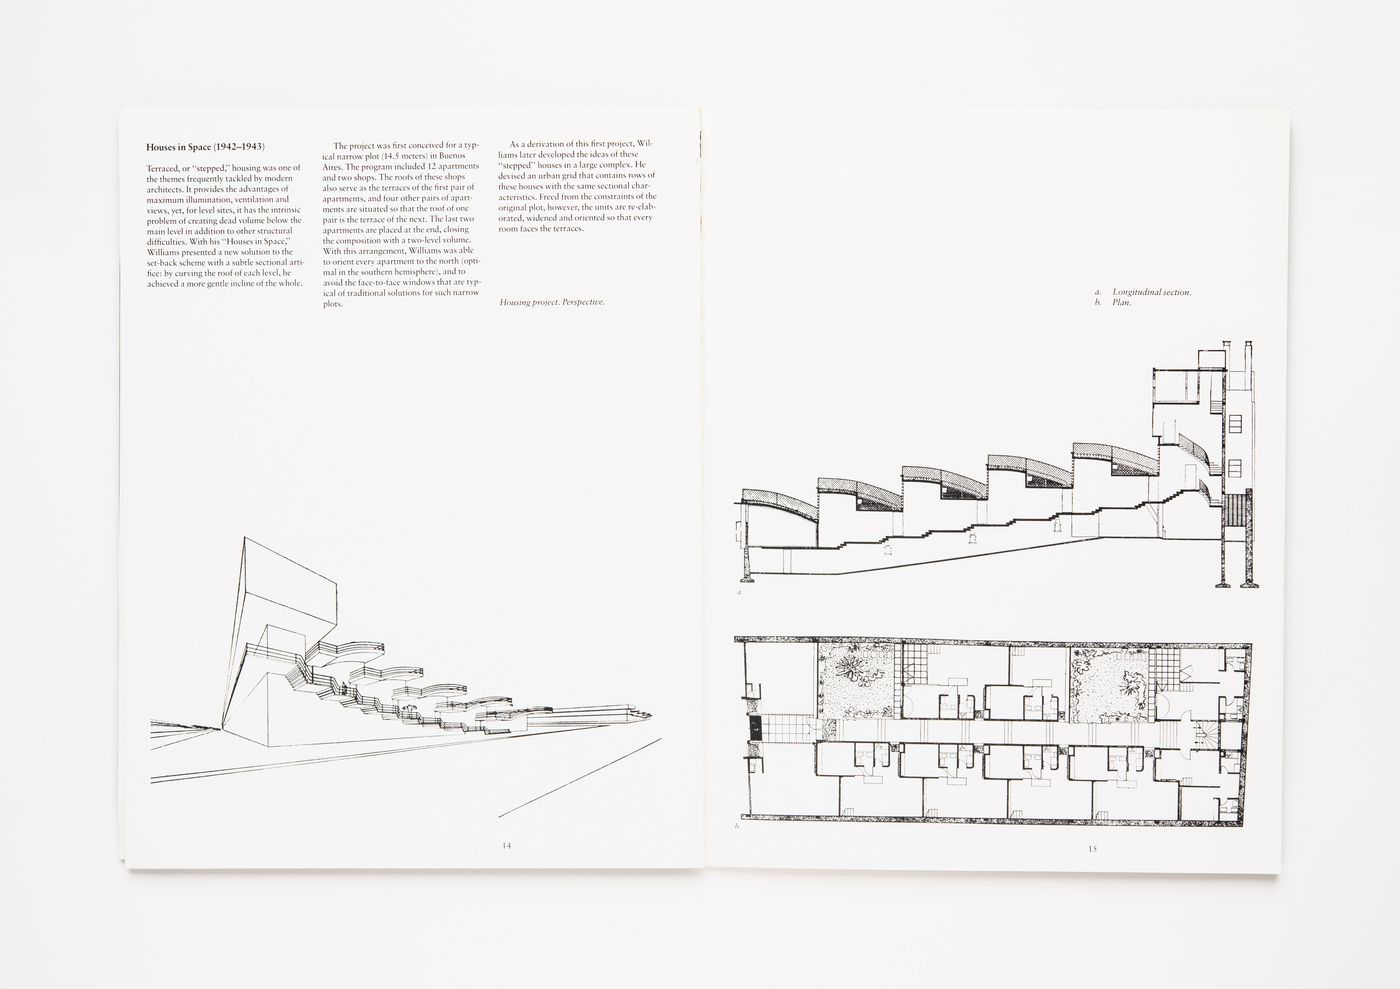 "Amancio Williams" catalogue from exhibition at Harvard GSD by Jorge Silvetti